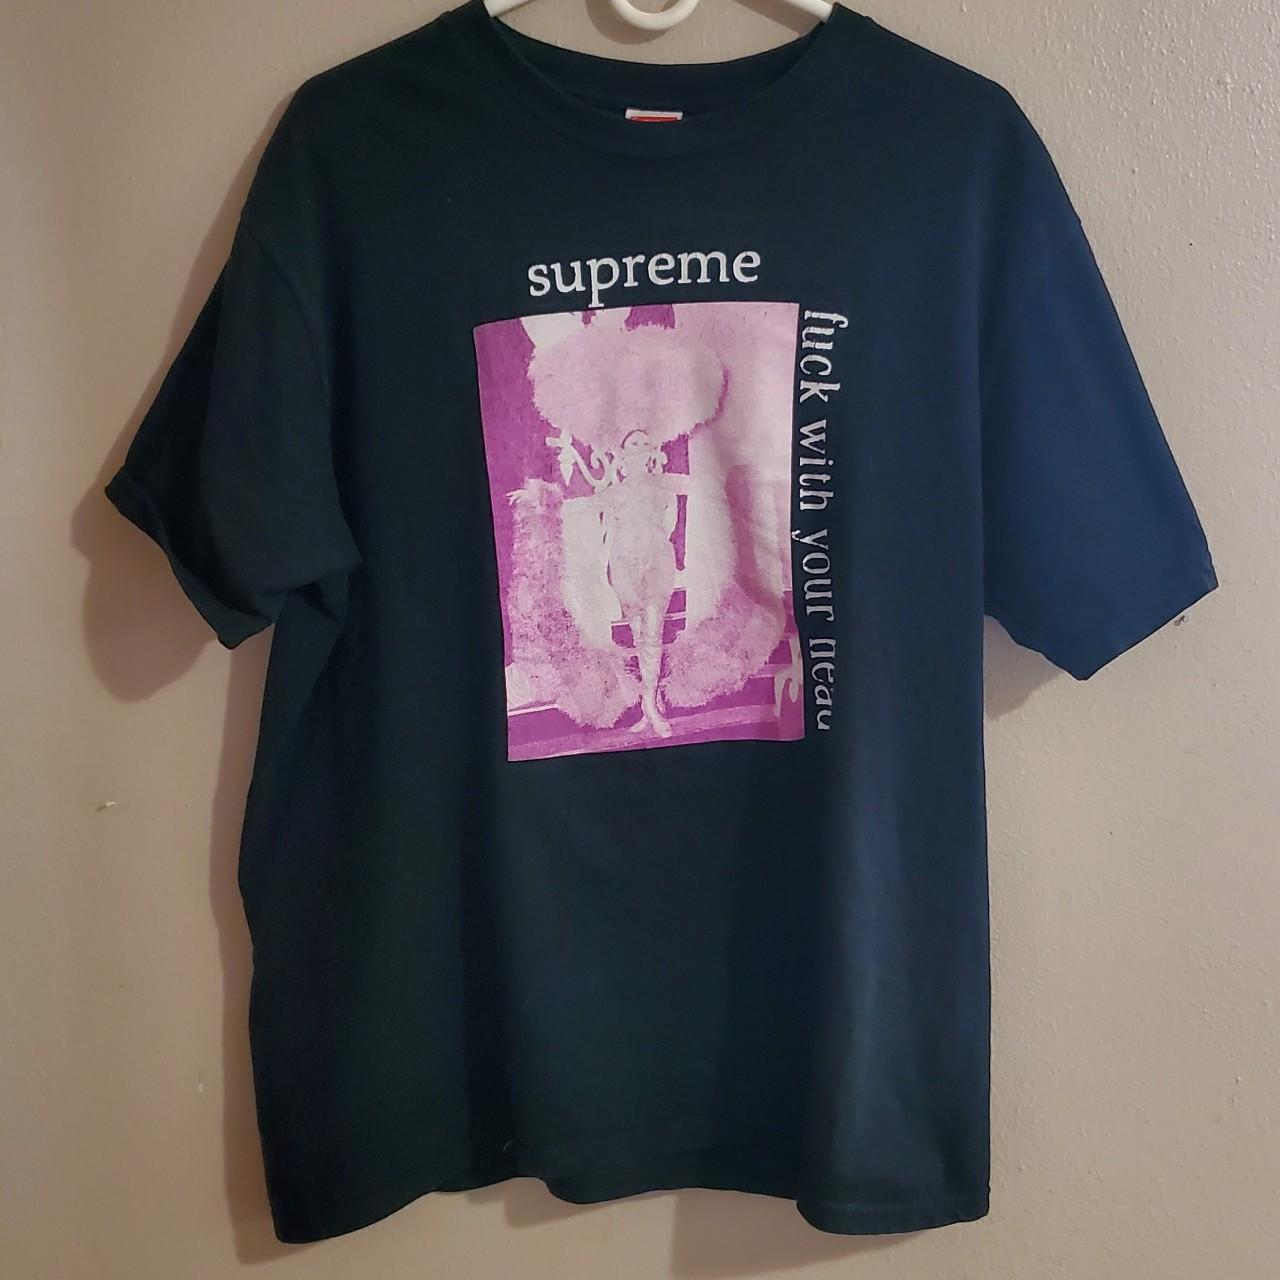 SUPREME FUCK WITH YOUR HEAD T-SHIRT 👹 WELL TAKEN - Depop